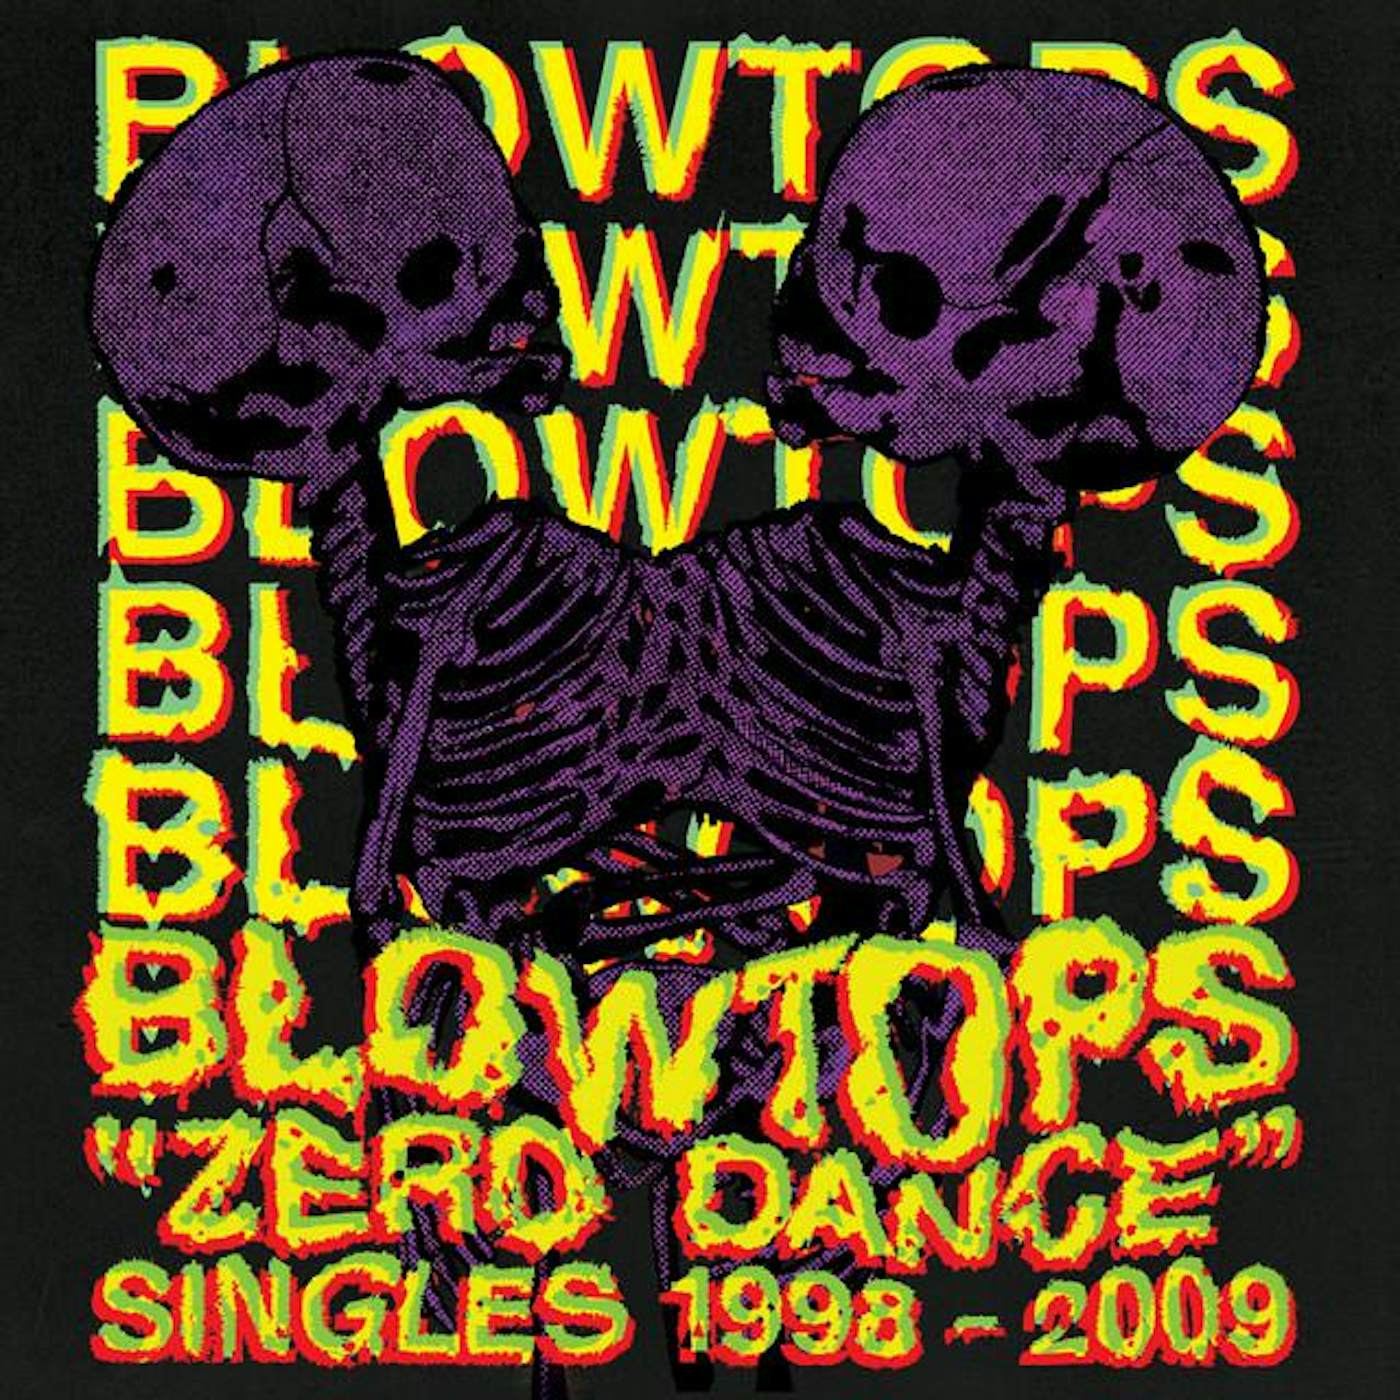 The Blowtops